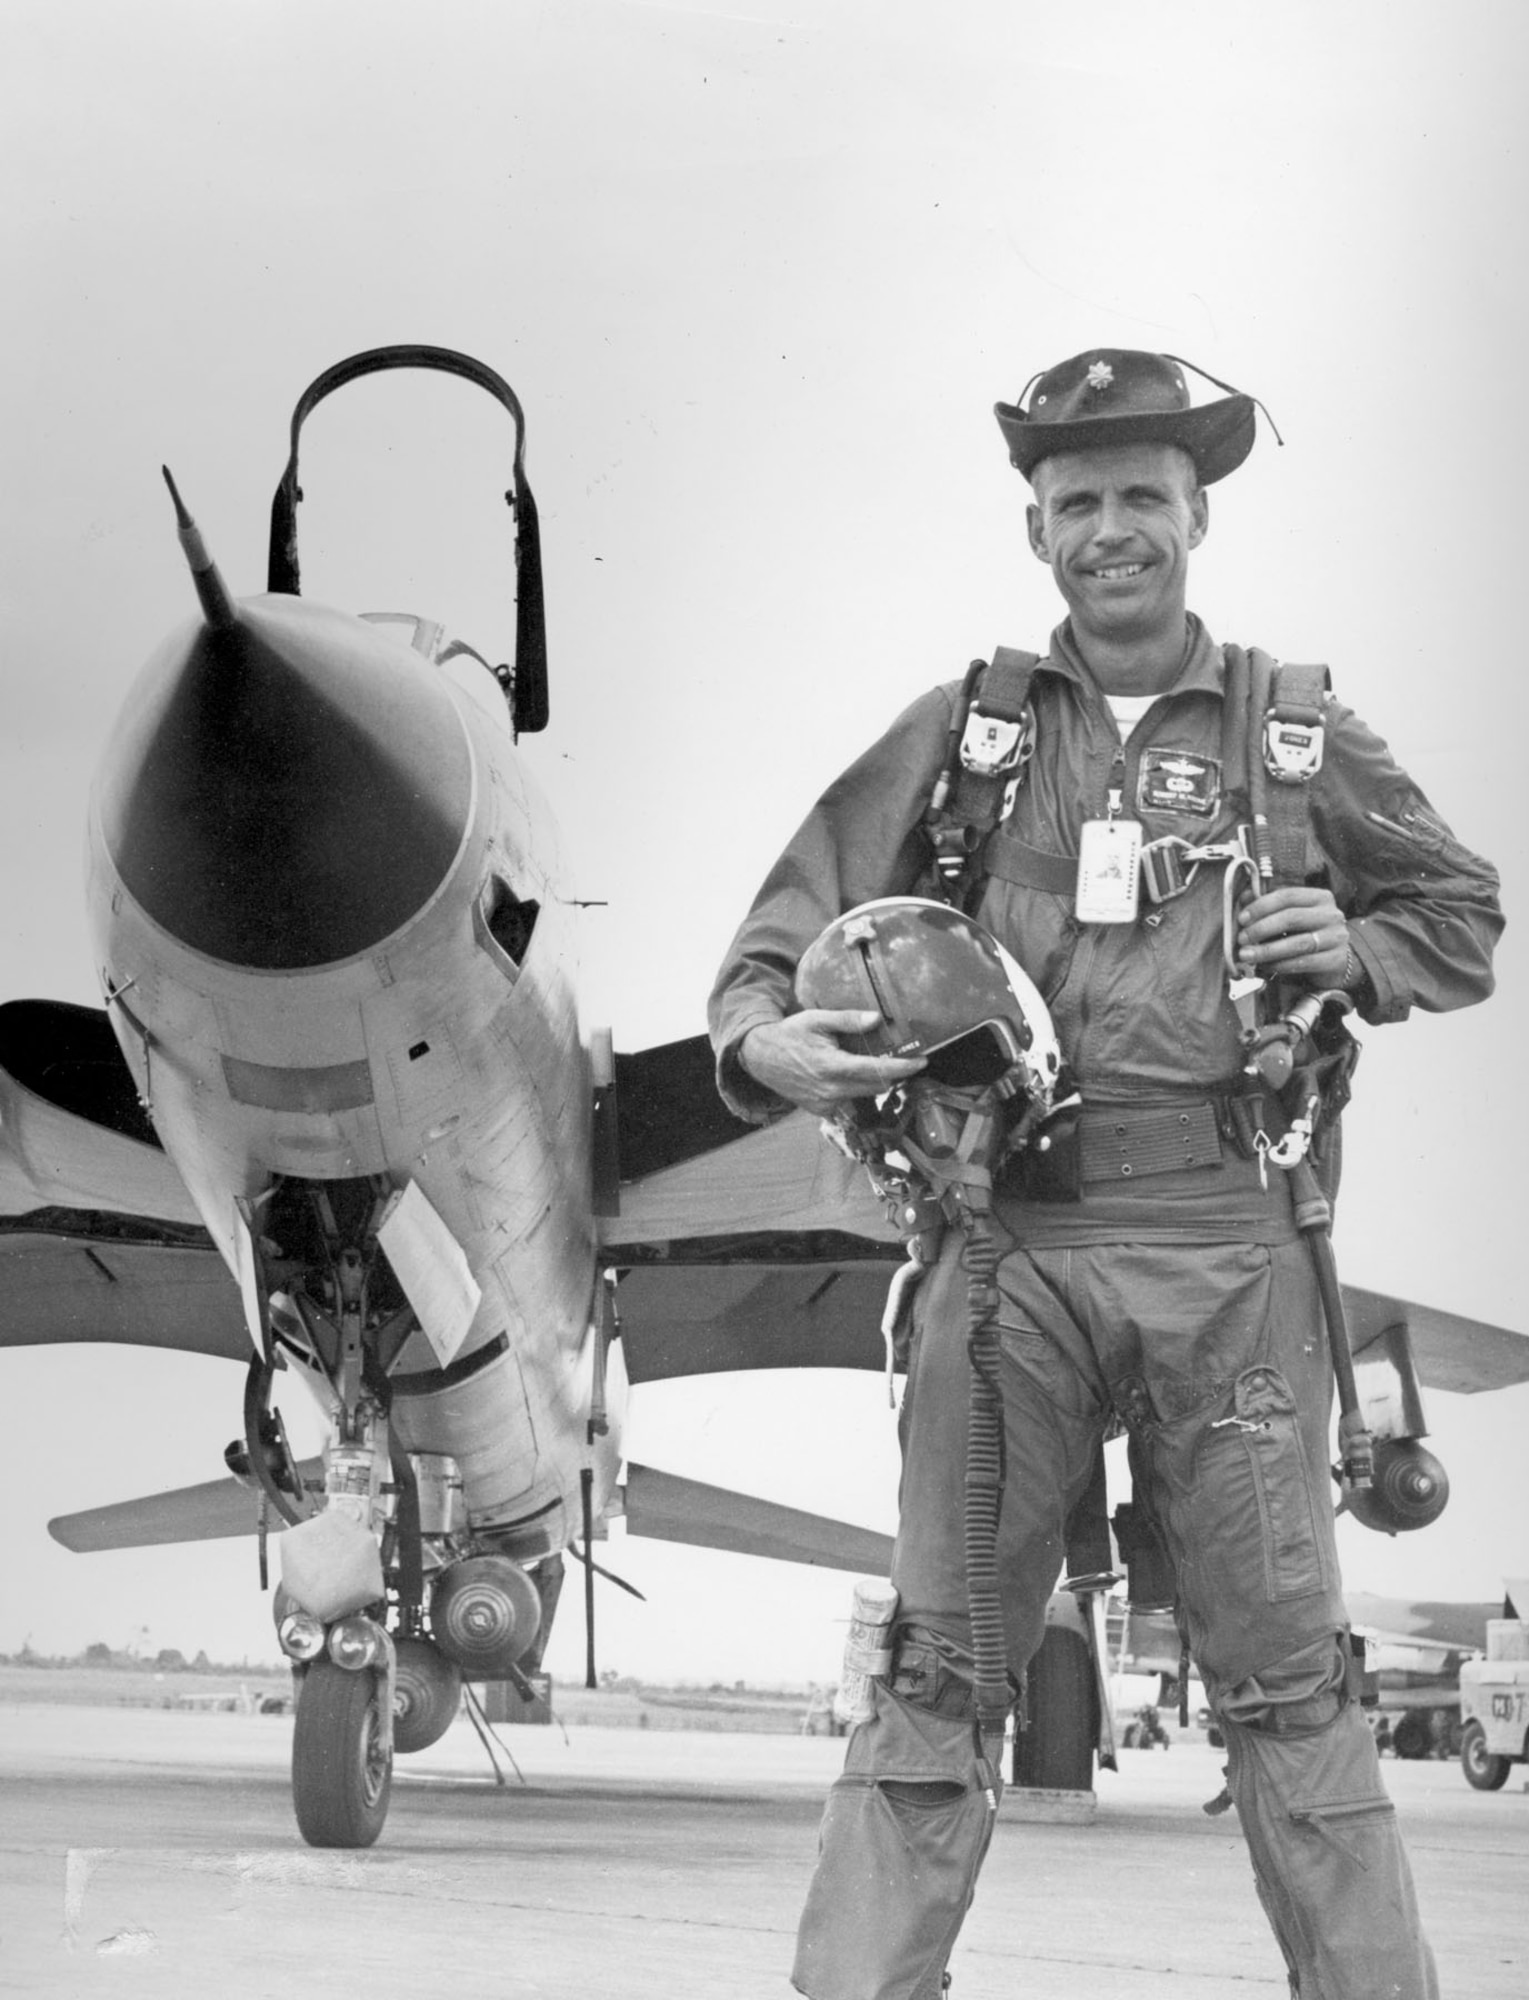 Col. Krone wearing the hat on display. Attached to the hat is a Royal Thai Air Force pilot’s badge. (U.S. Air Force photo)